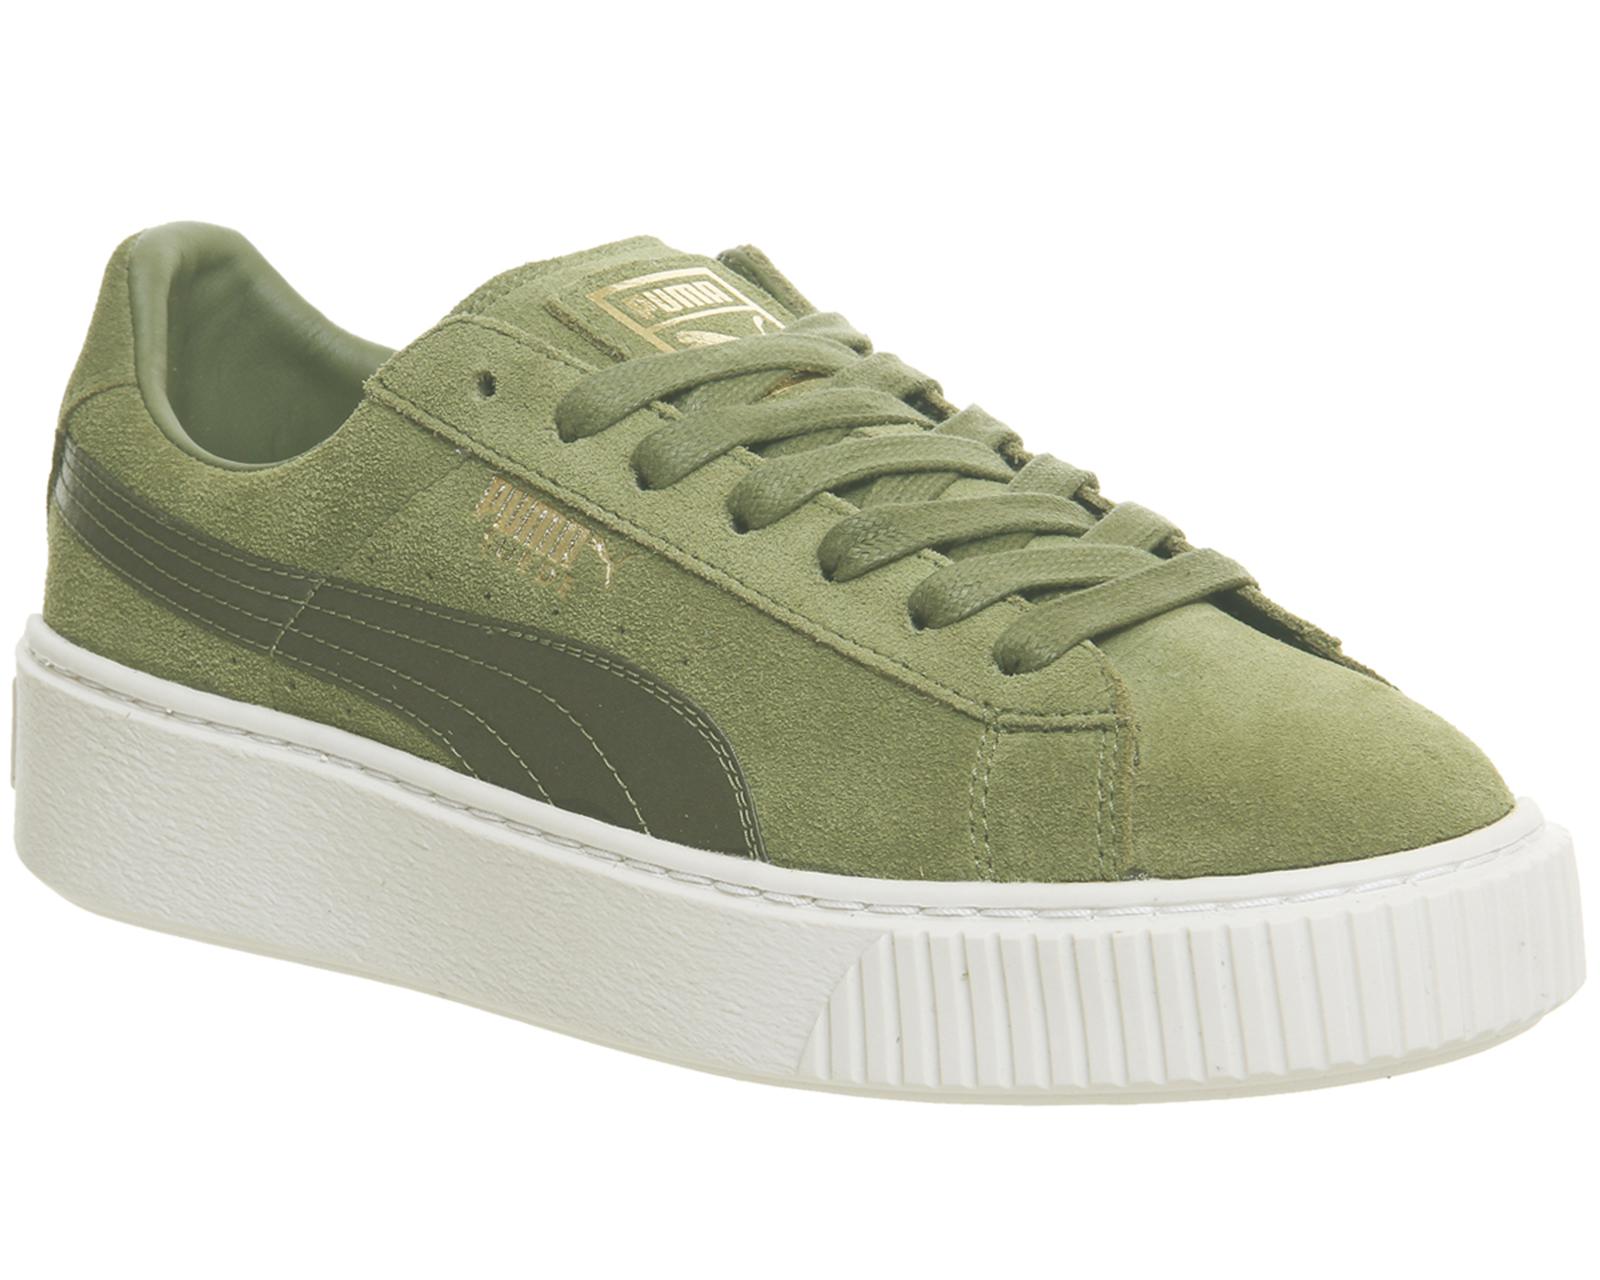 PUMA Suede Platform Trainers in Olive (Green) - Lyst